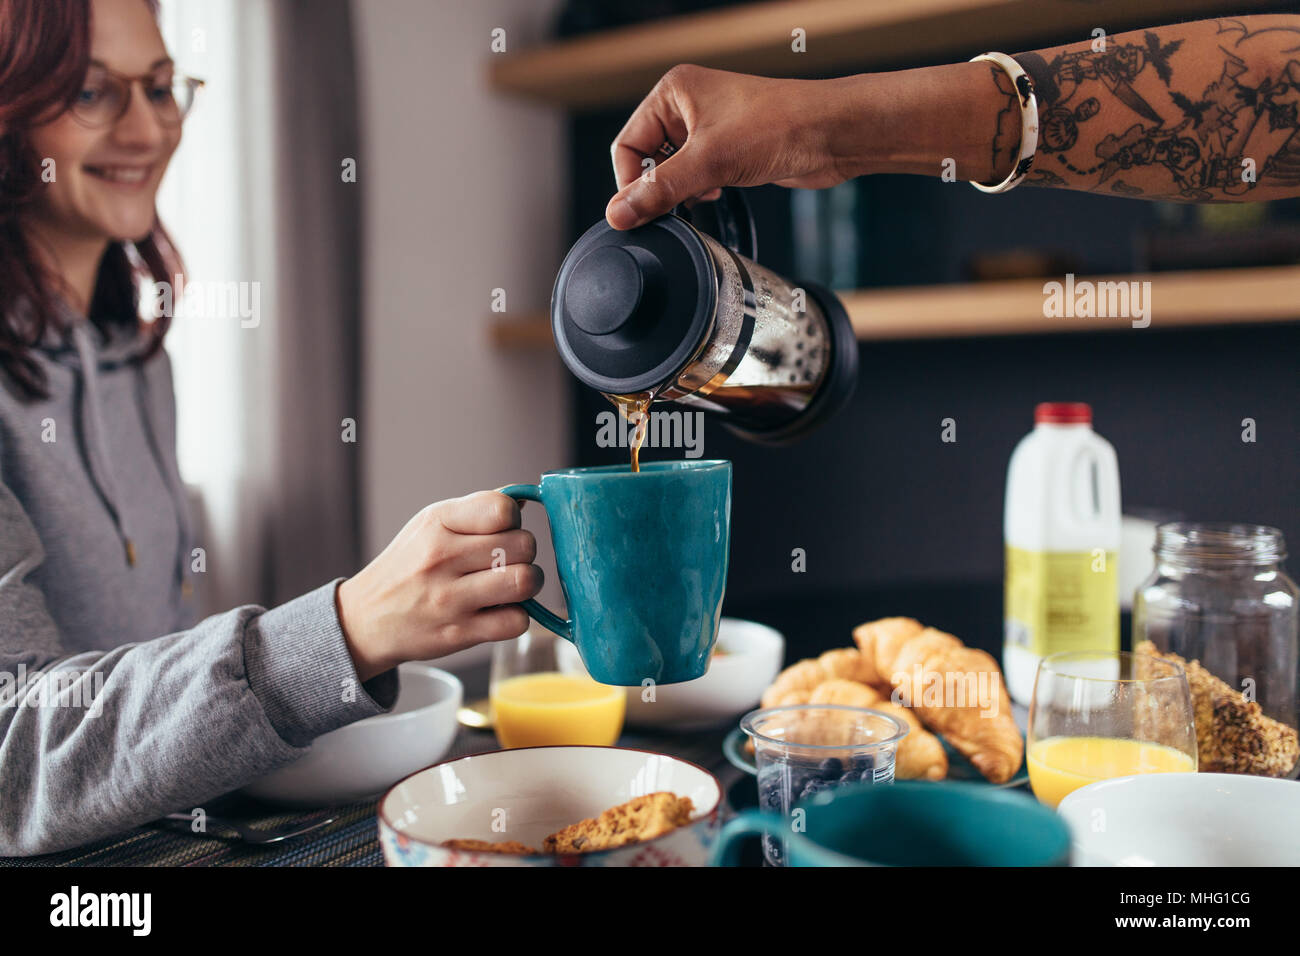 Close up of boyfriend pouring coffee into the cup of his girlfriend. Couple having breakfast together in morning. Stock Photo